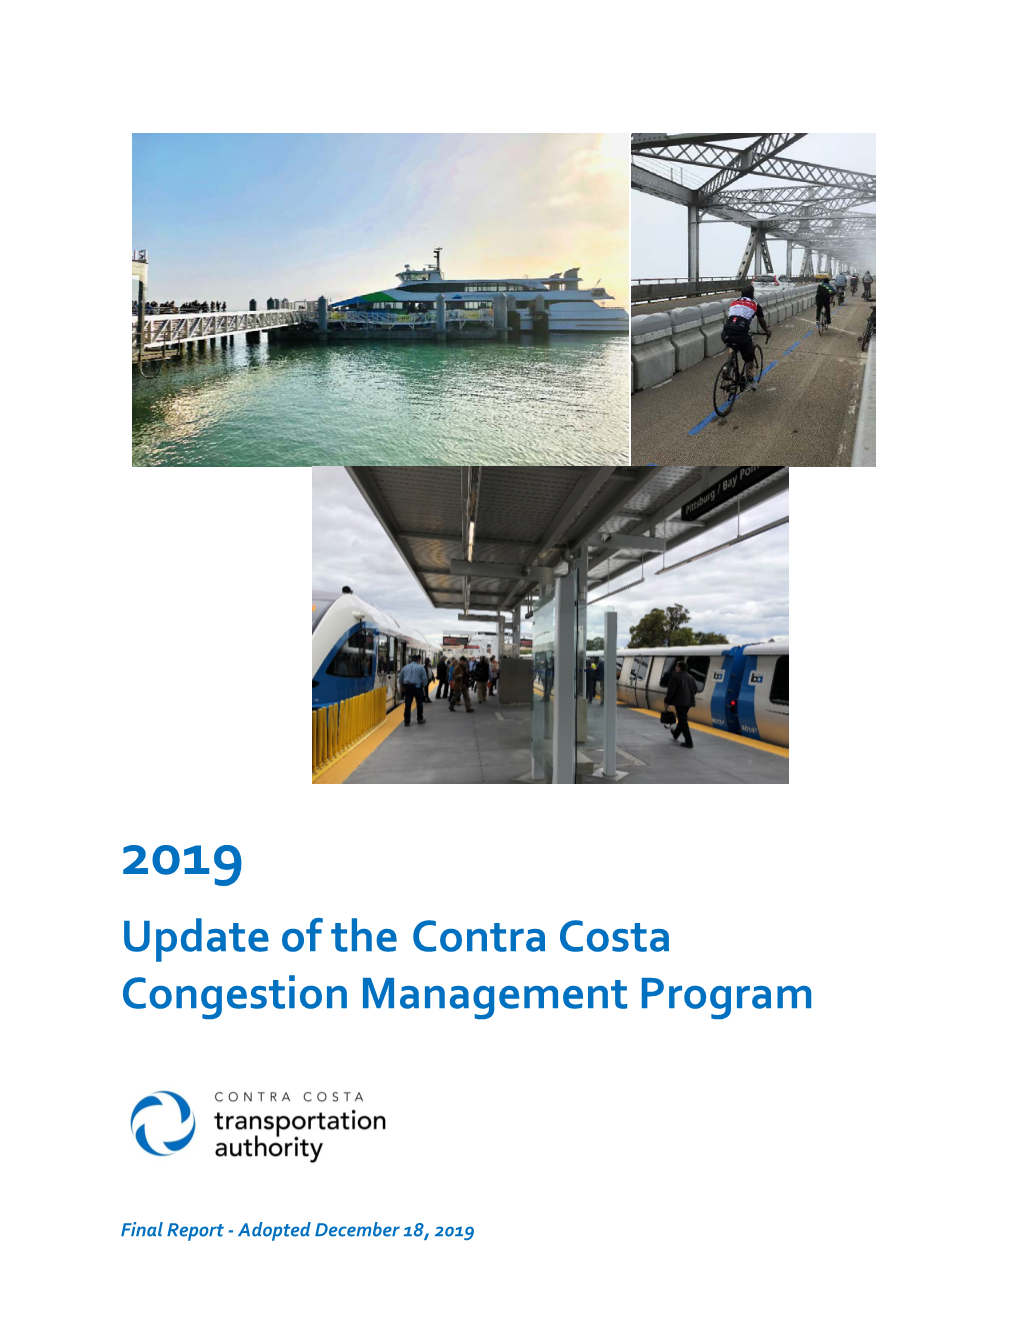 Update of the Contra Costa Congestion Management Program